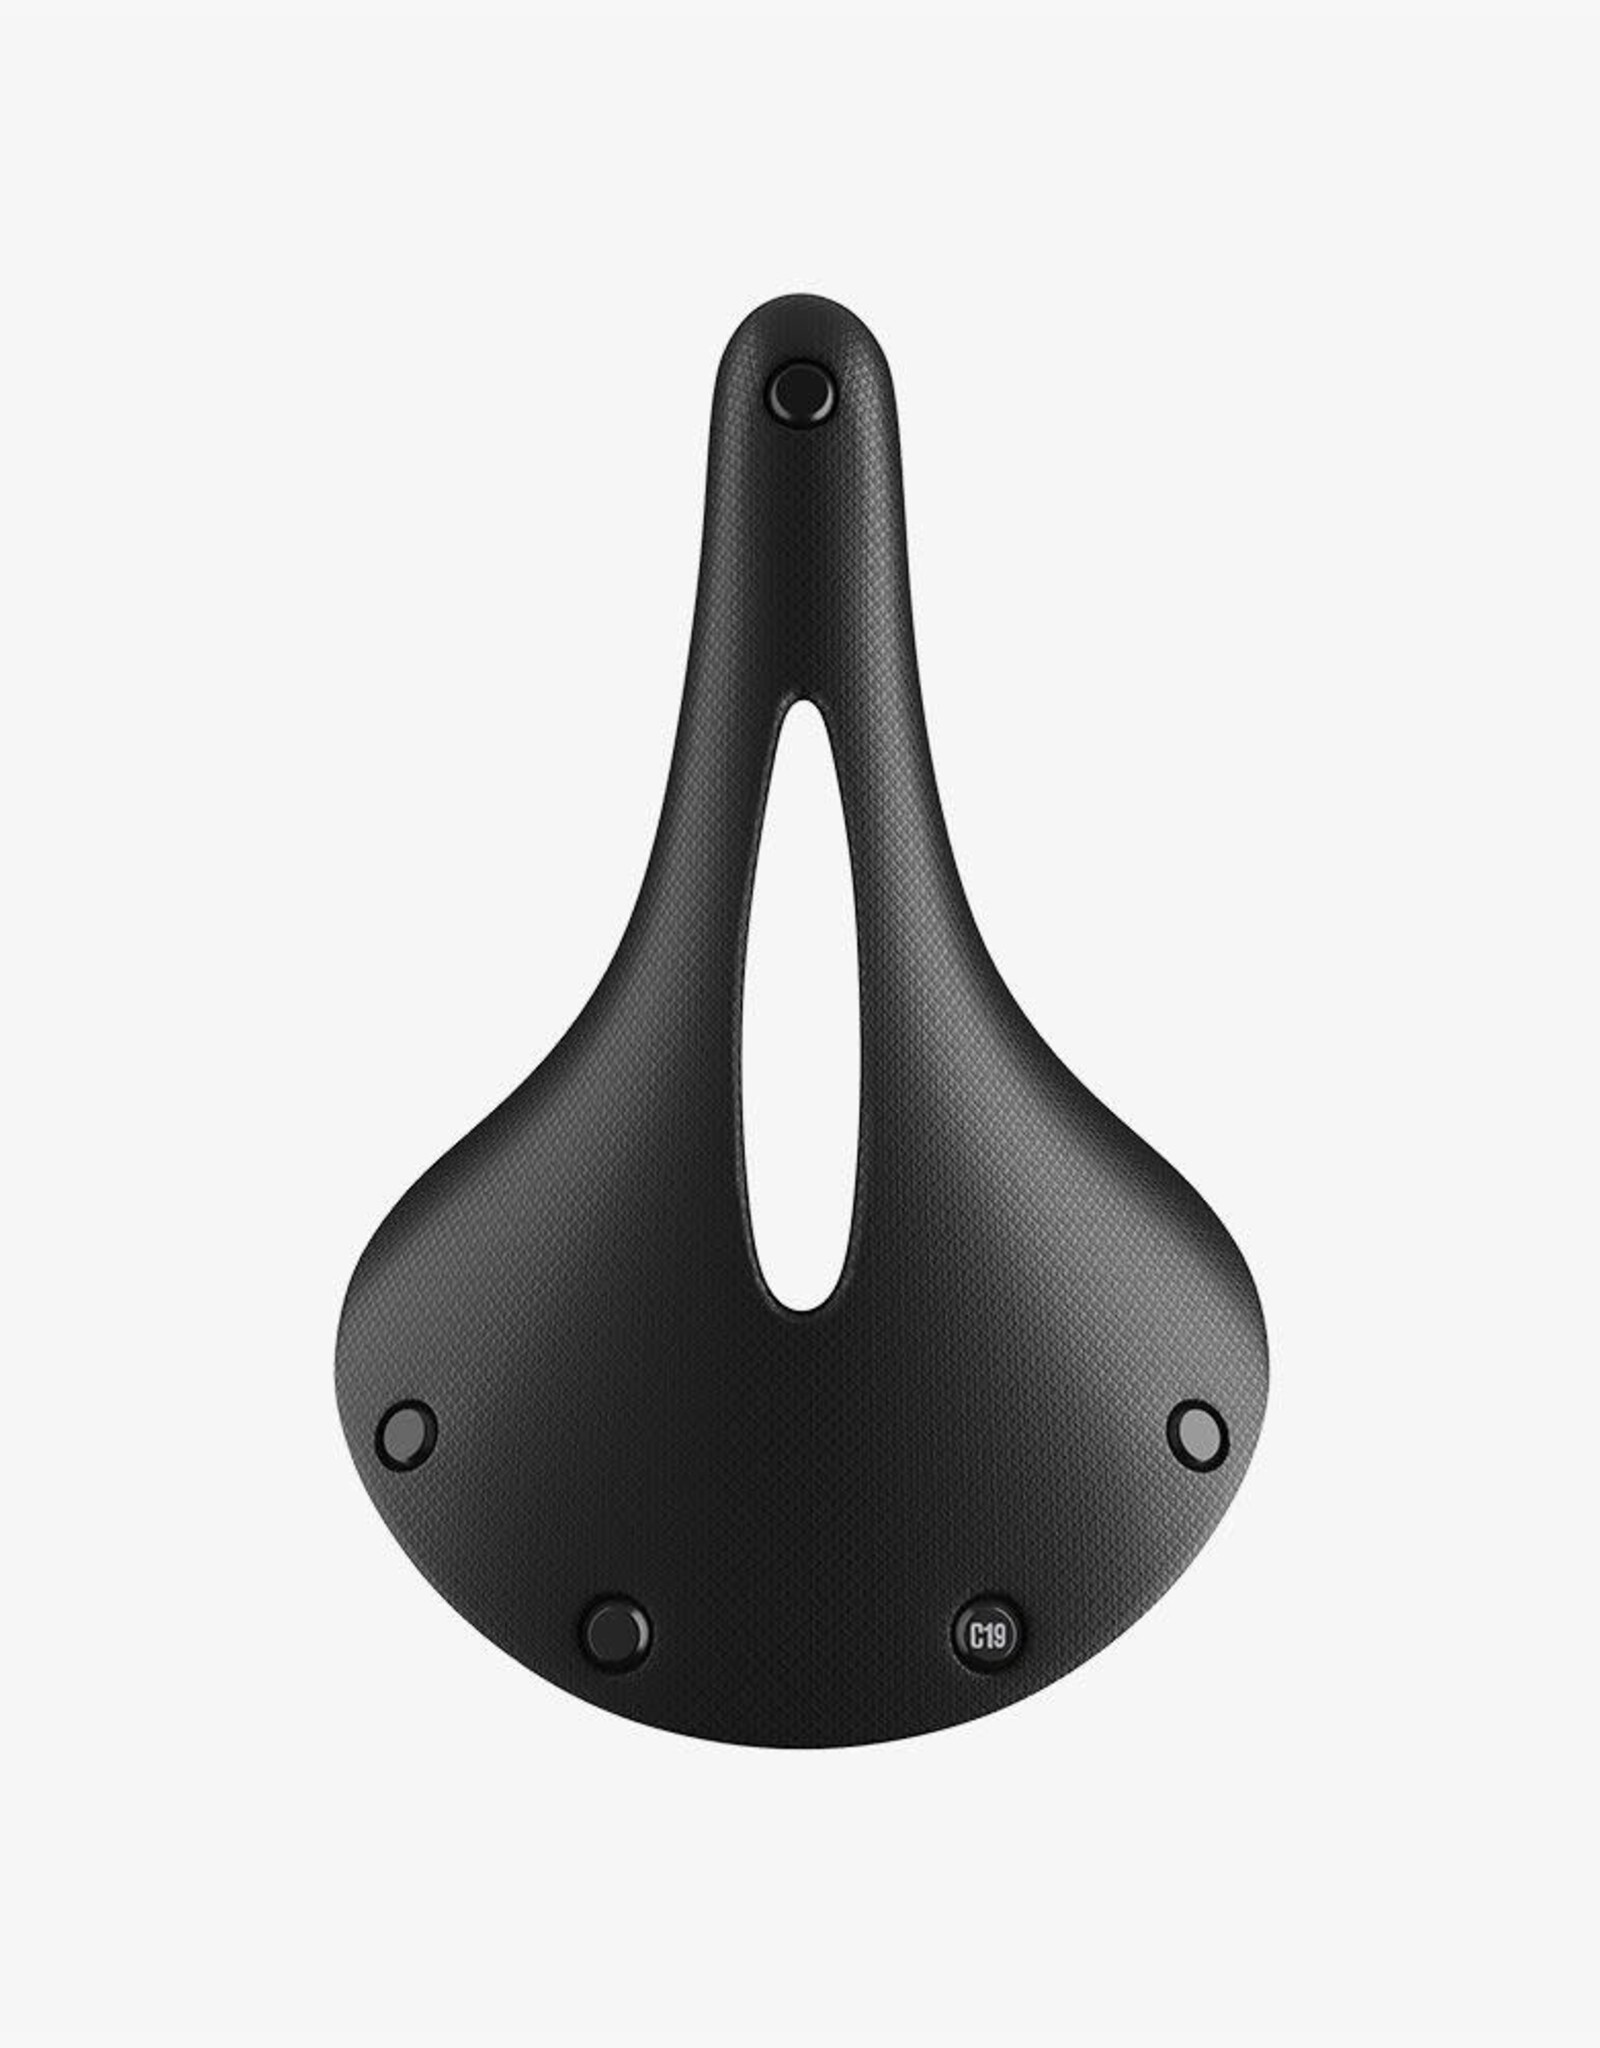 Brooks - Cambium Saddles C19 Carved, 184mm, Black All Weather